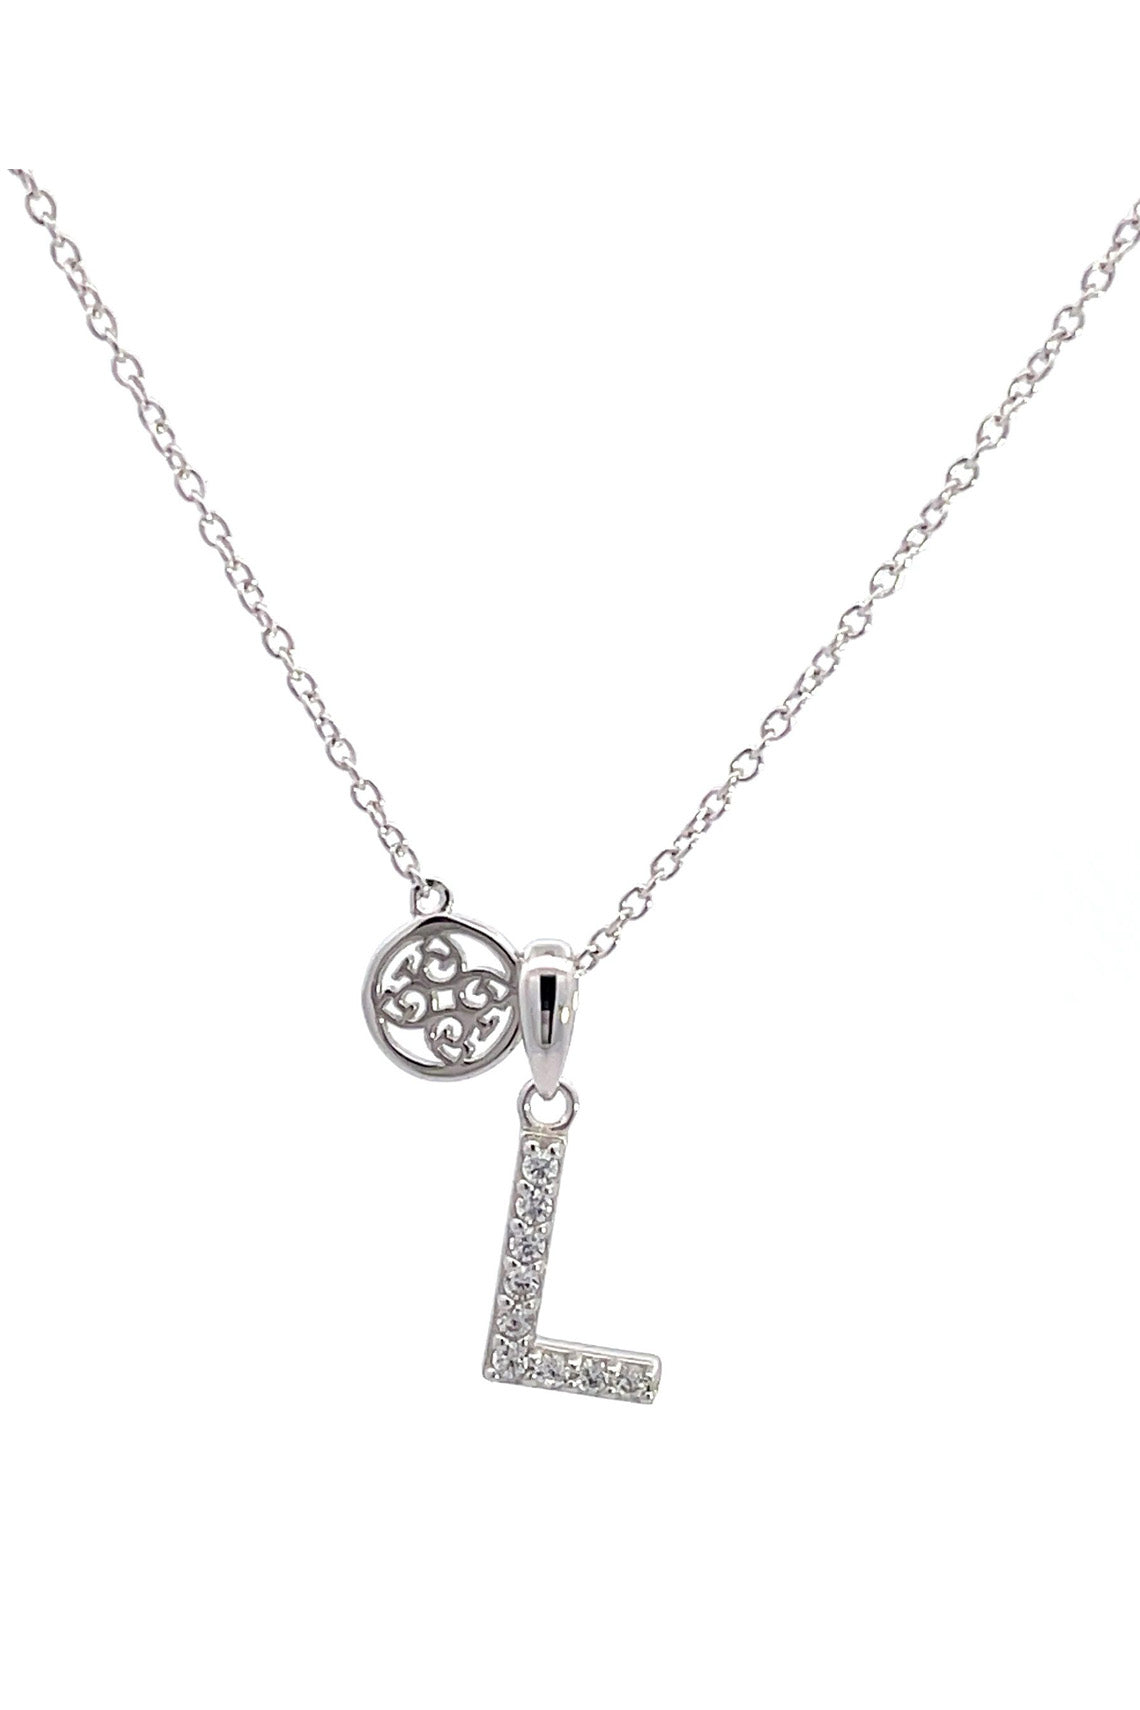 LUXURY LETTERS L INITIAL PENDANT SILVER